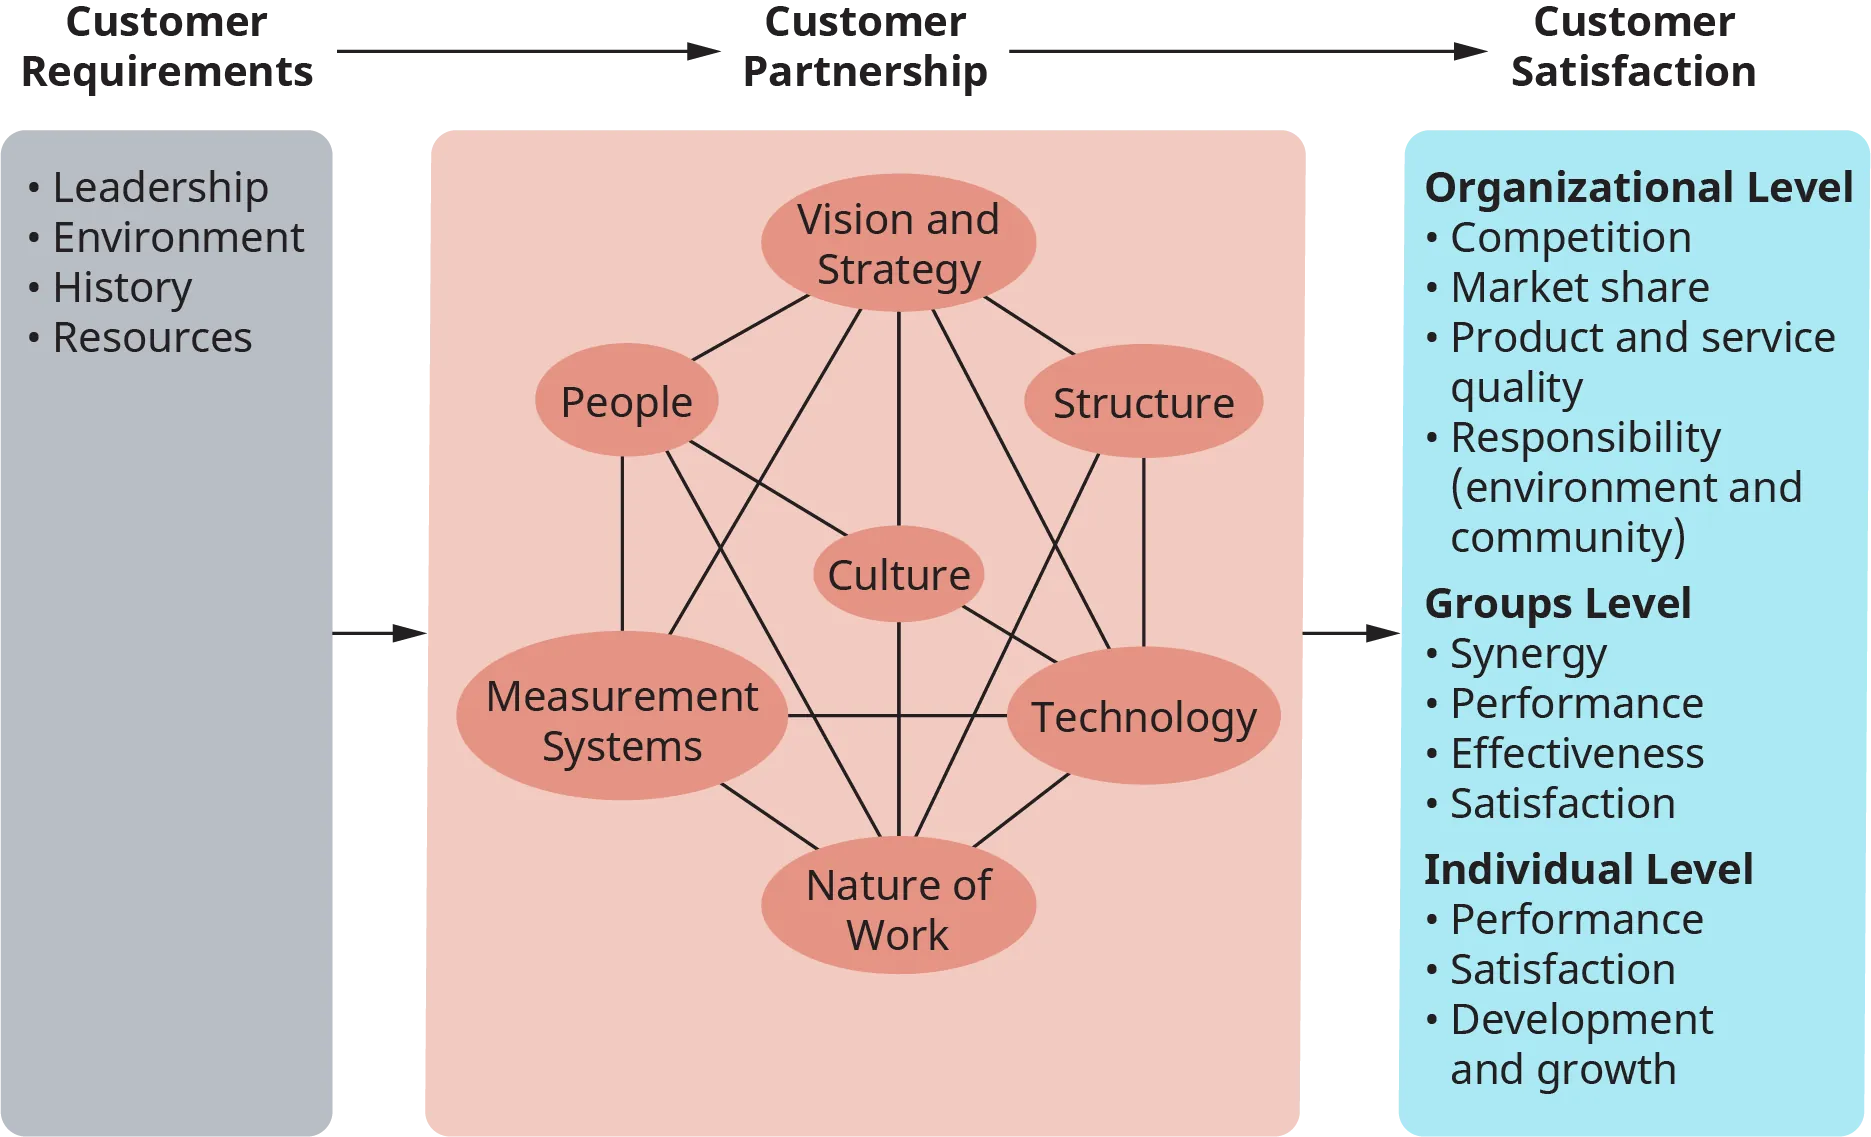 An illustration depicts the role of culture in organizational alignment.